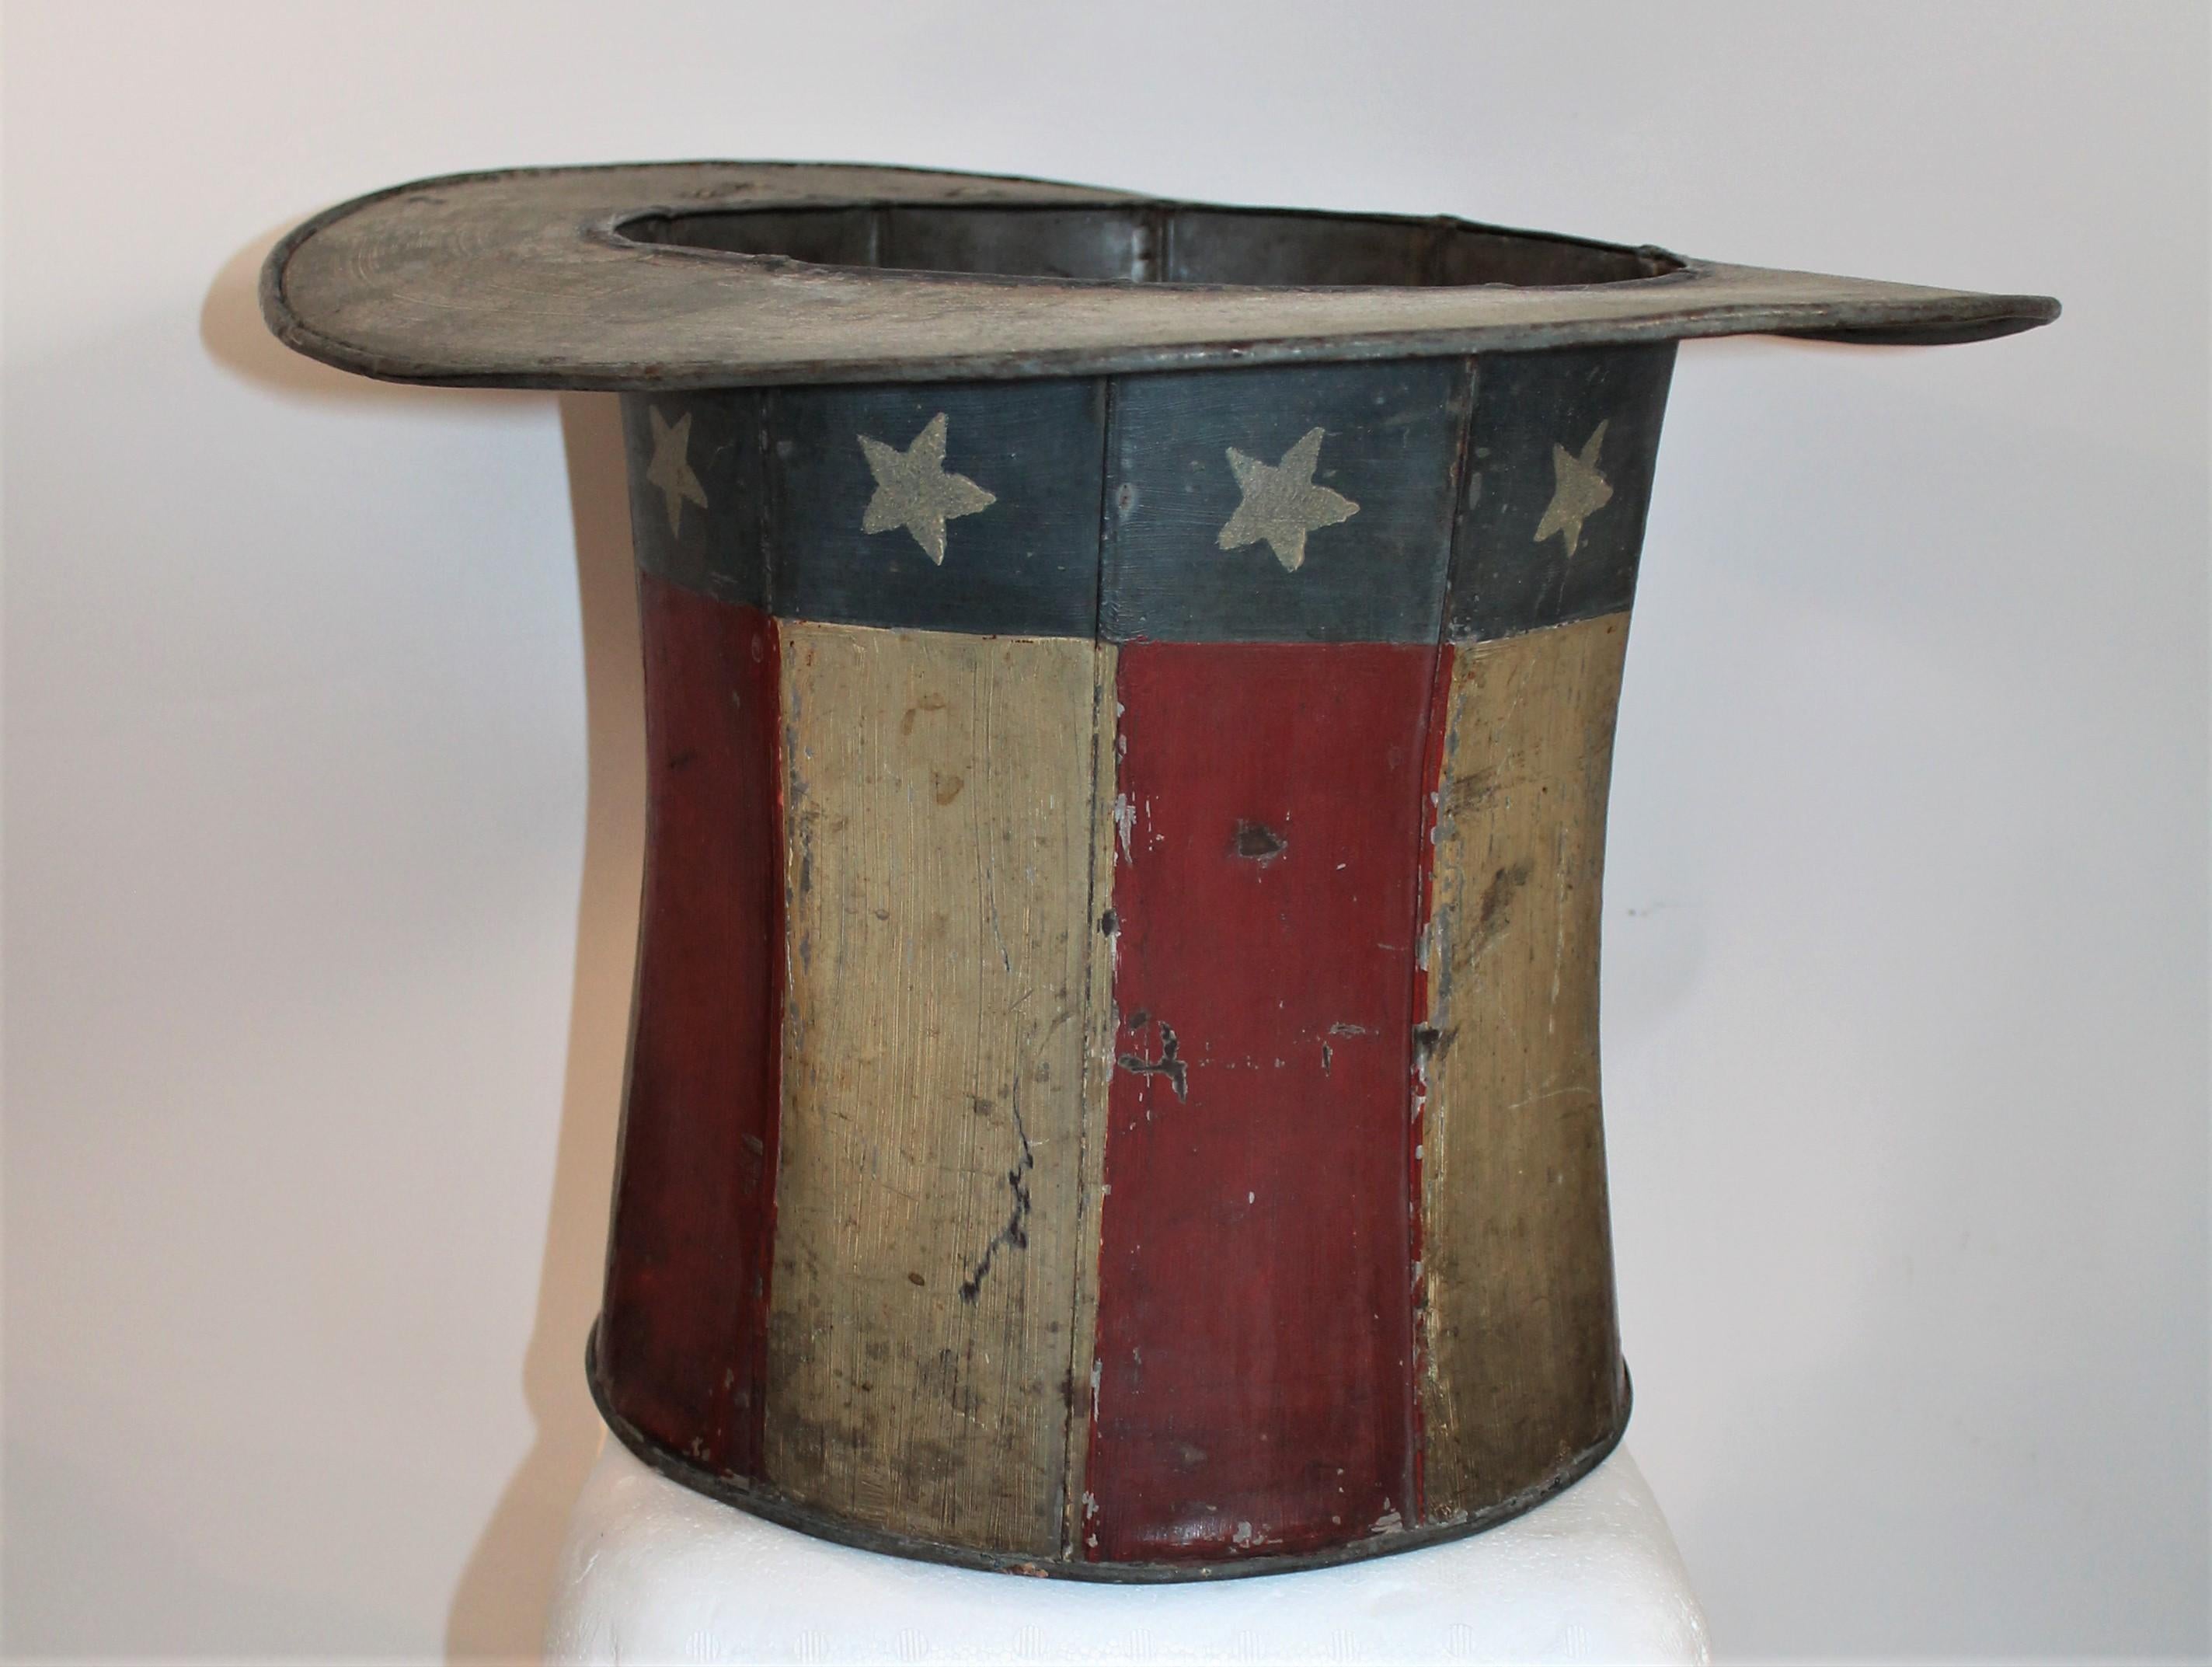 This original painted tin trade sign of a patriotic motif. Looks like a Uncle Sam's top hat. This handmade and painted tin trade sign is signed by the maker and dated 1881.

Interior diameter measures - 10 inches.